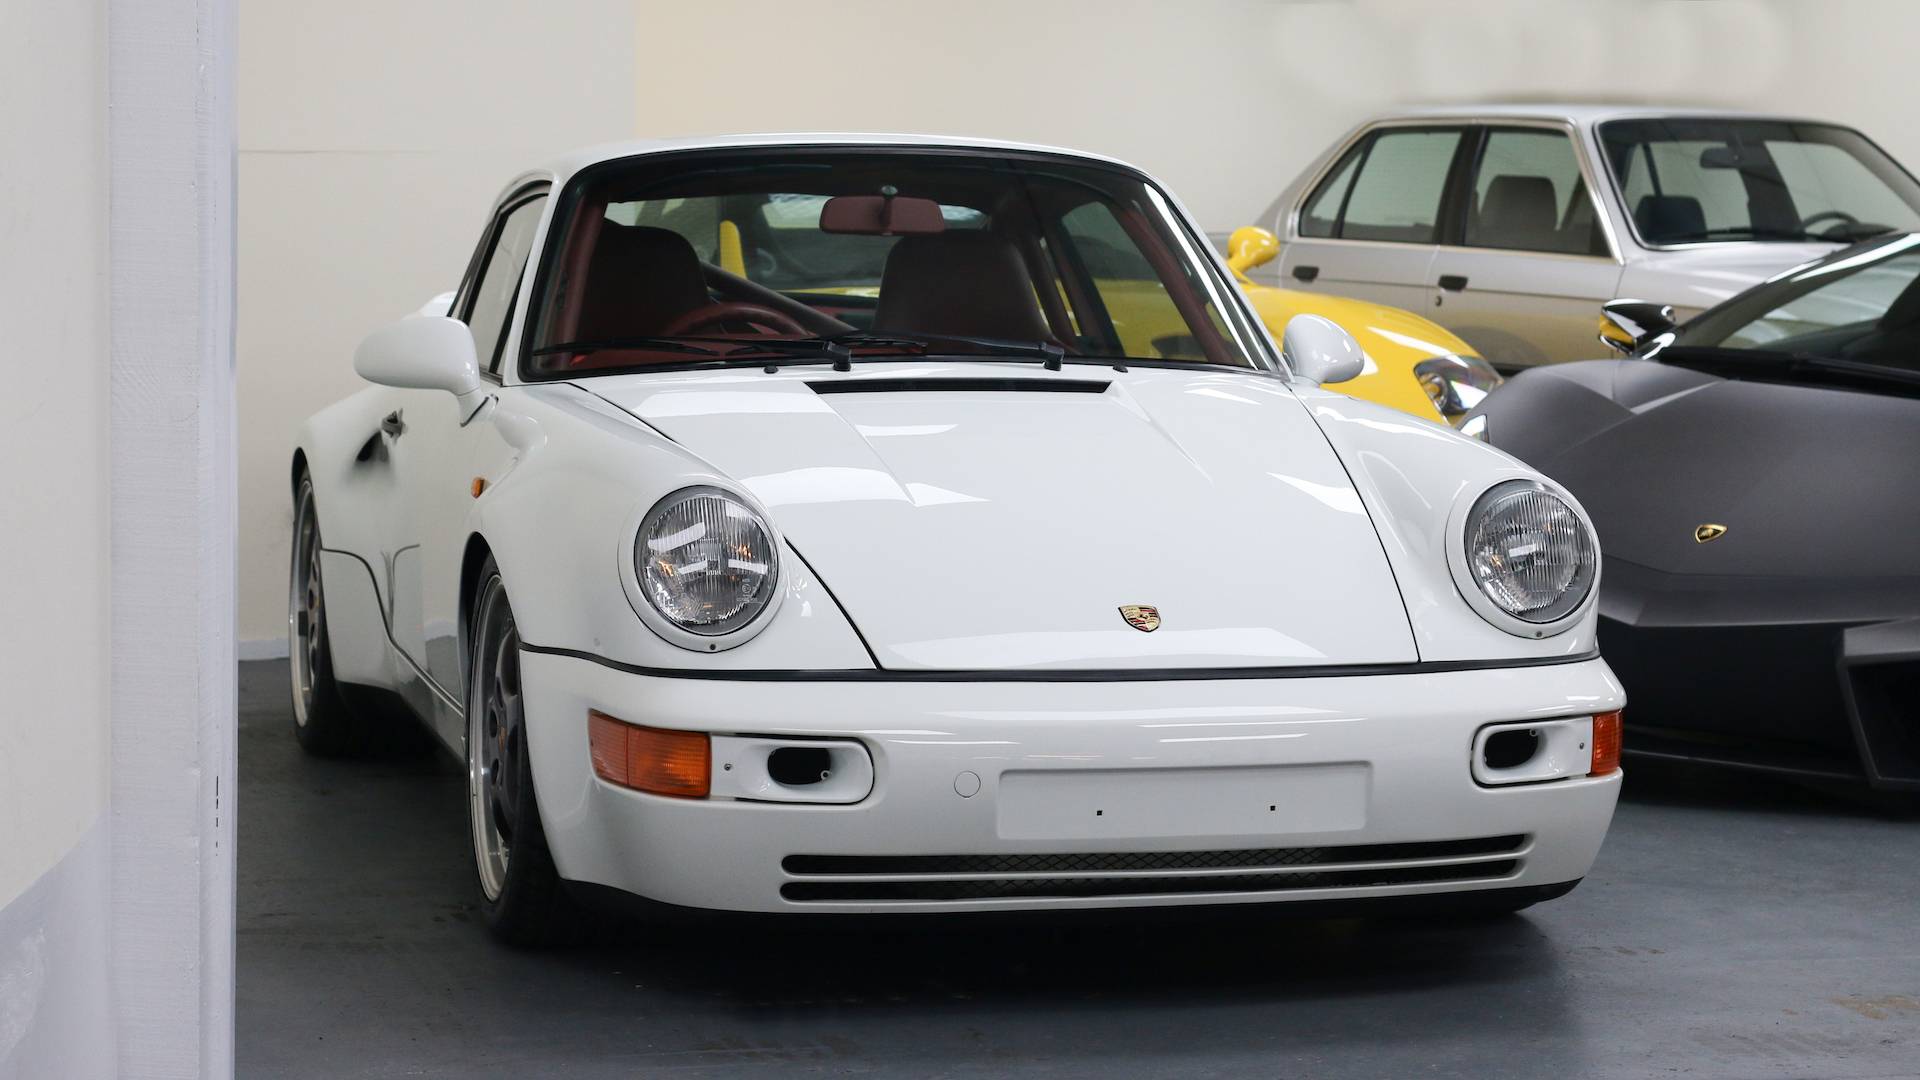 For Sale Porsche 911 Turbo S Leichtbau 1993 Offered For Gbp 1 495 000